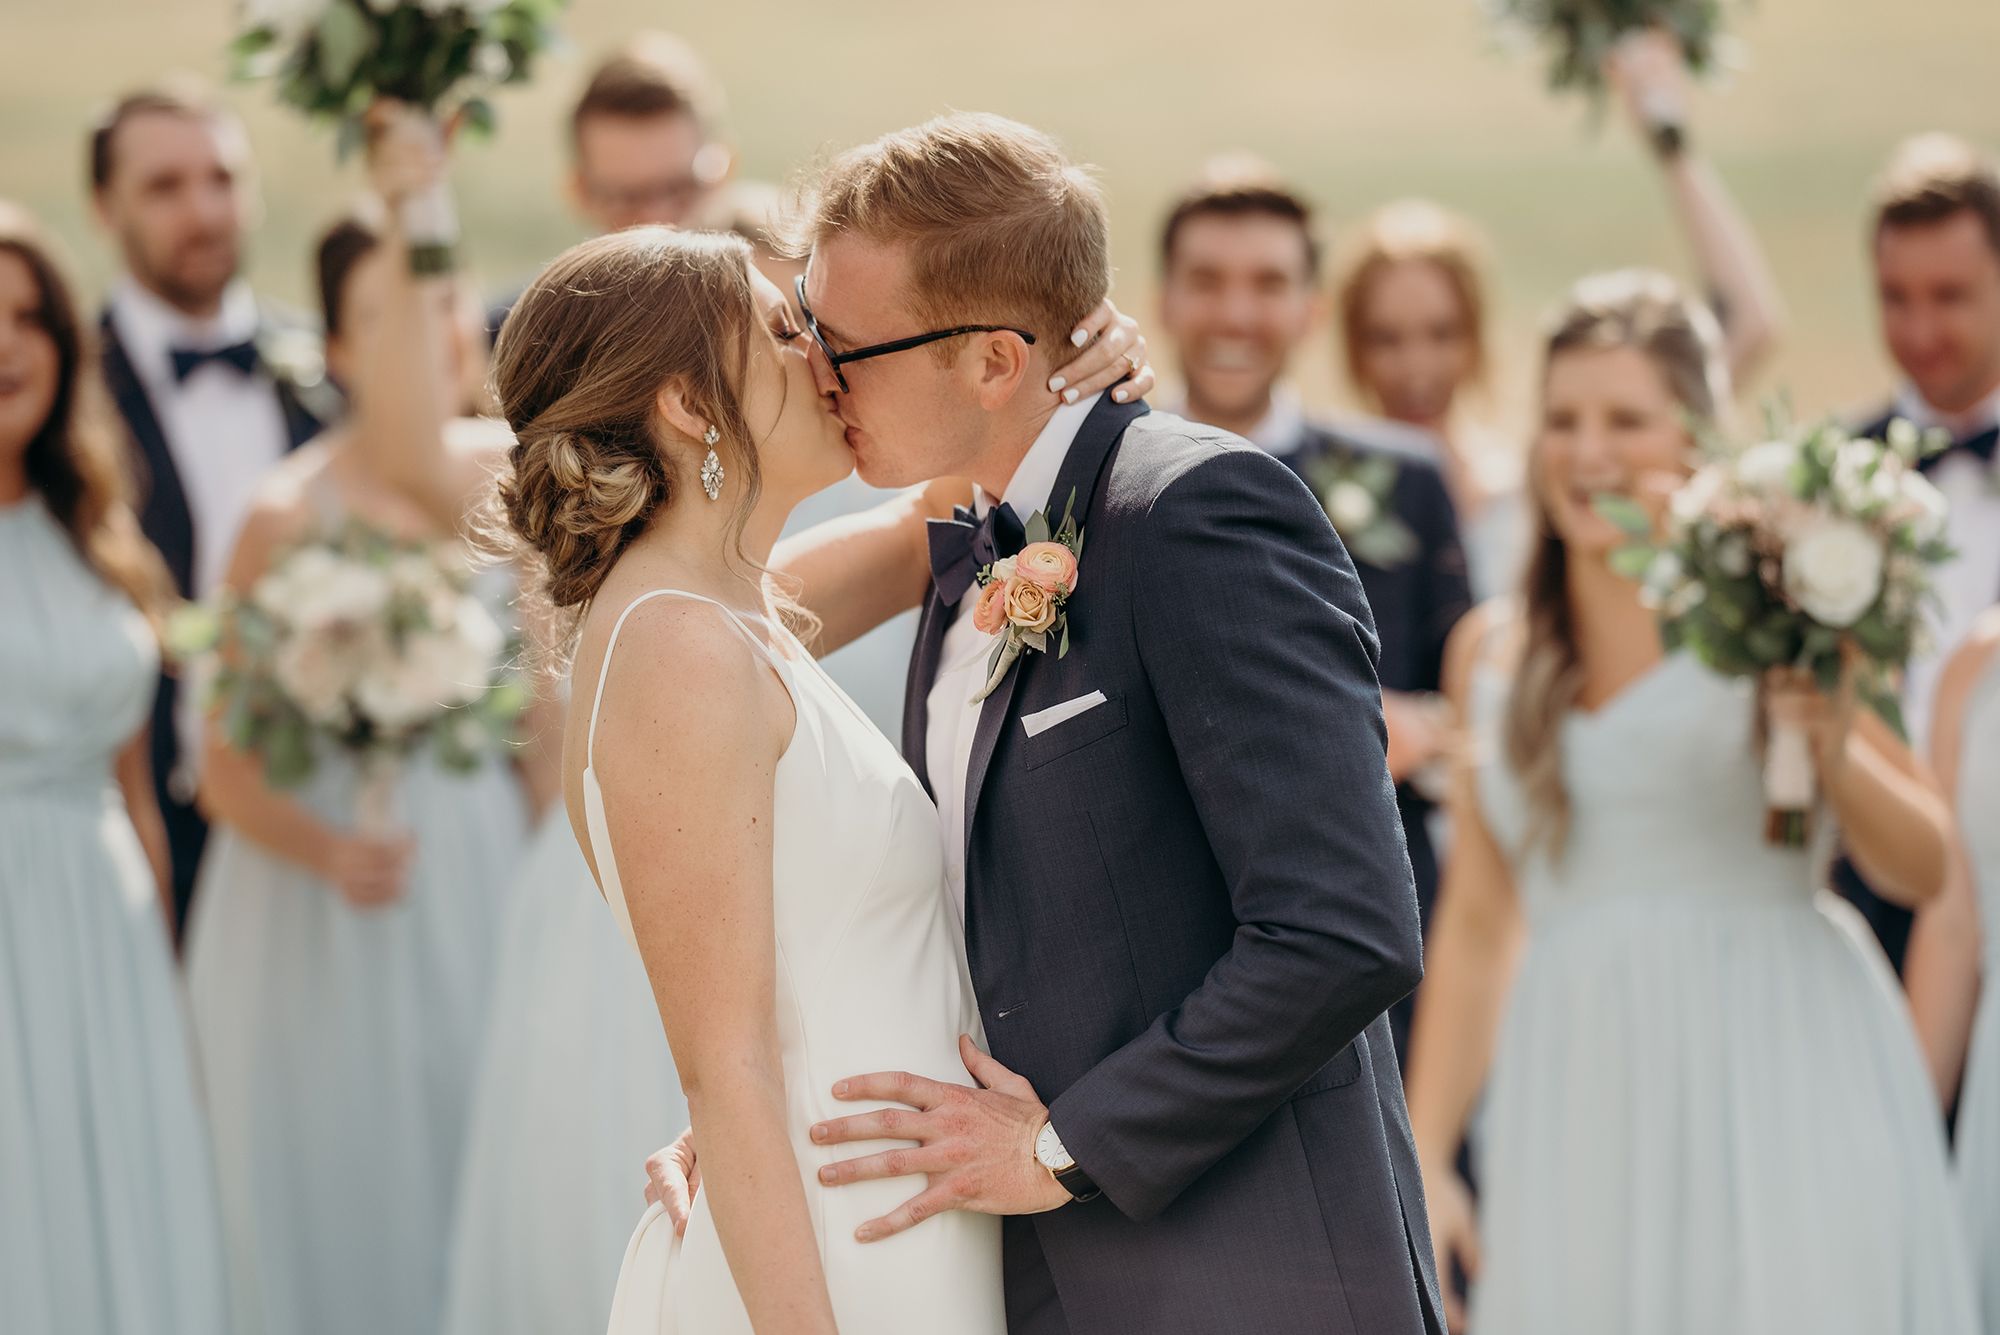 photo of a blonde groom in a blue suit kissing his bride during a wedding ceremony